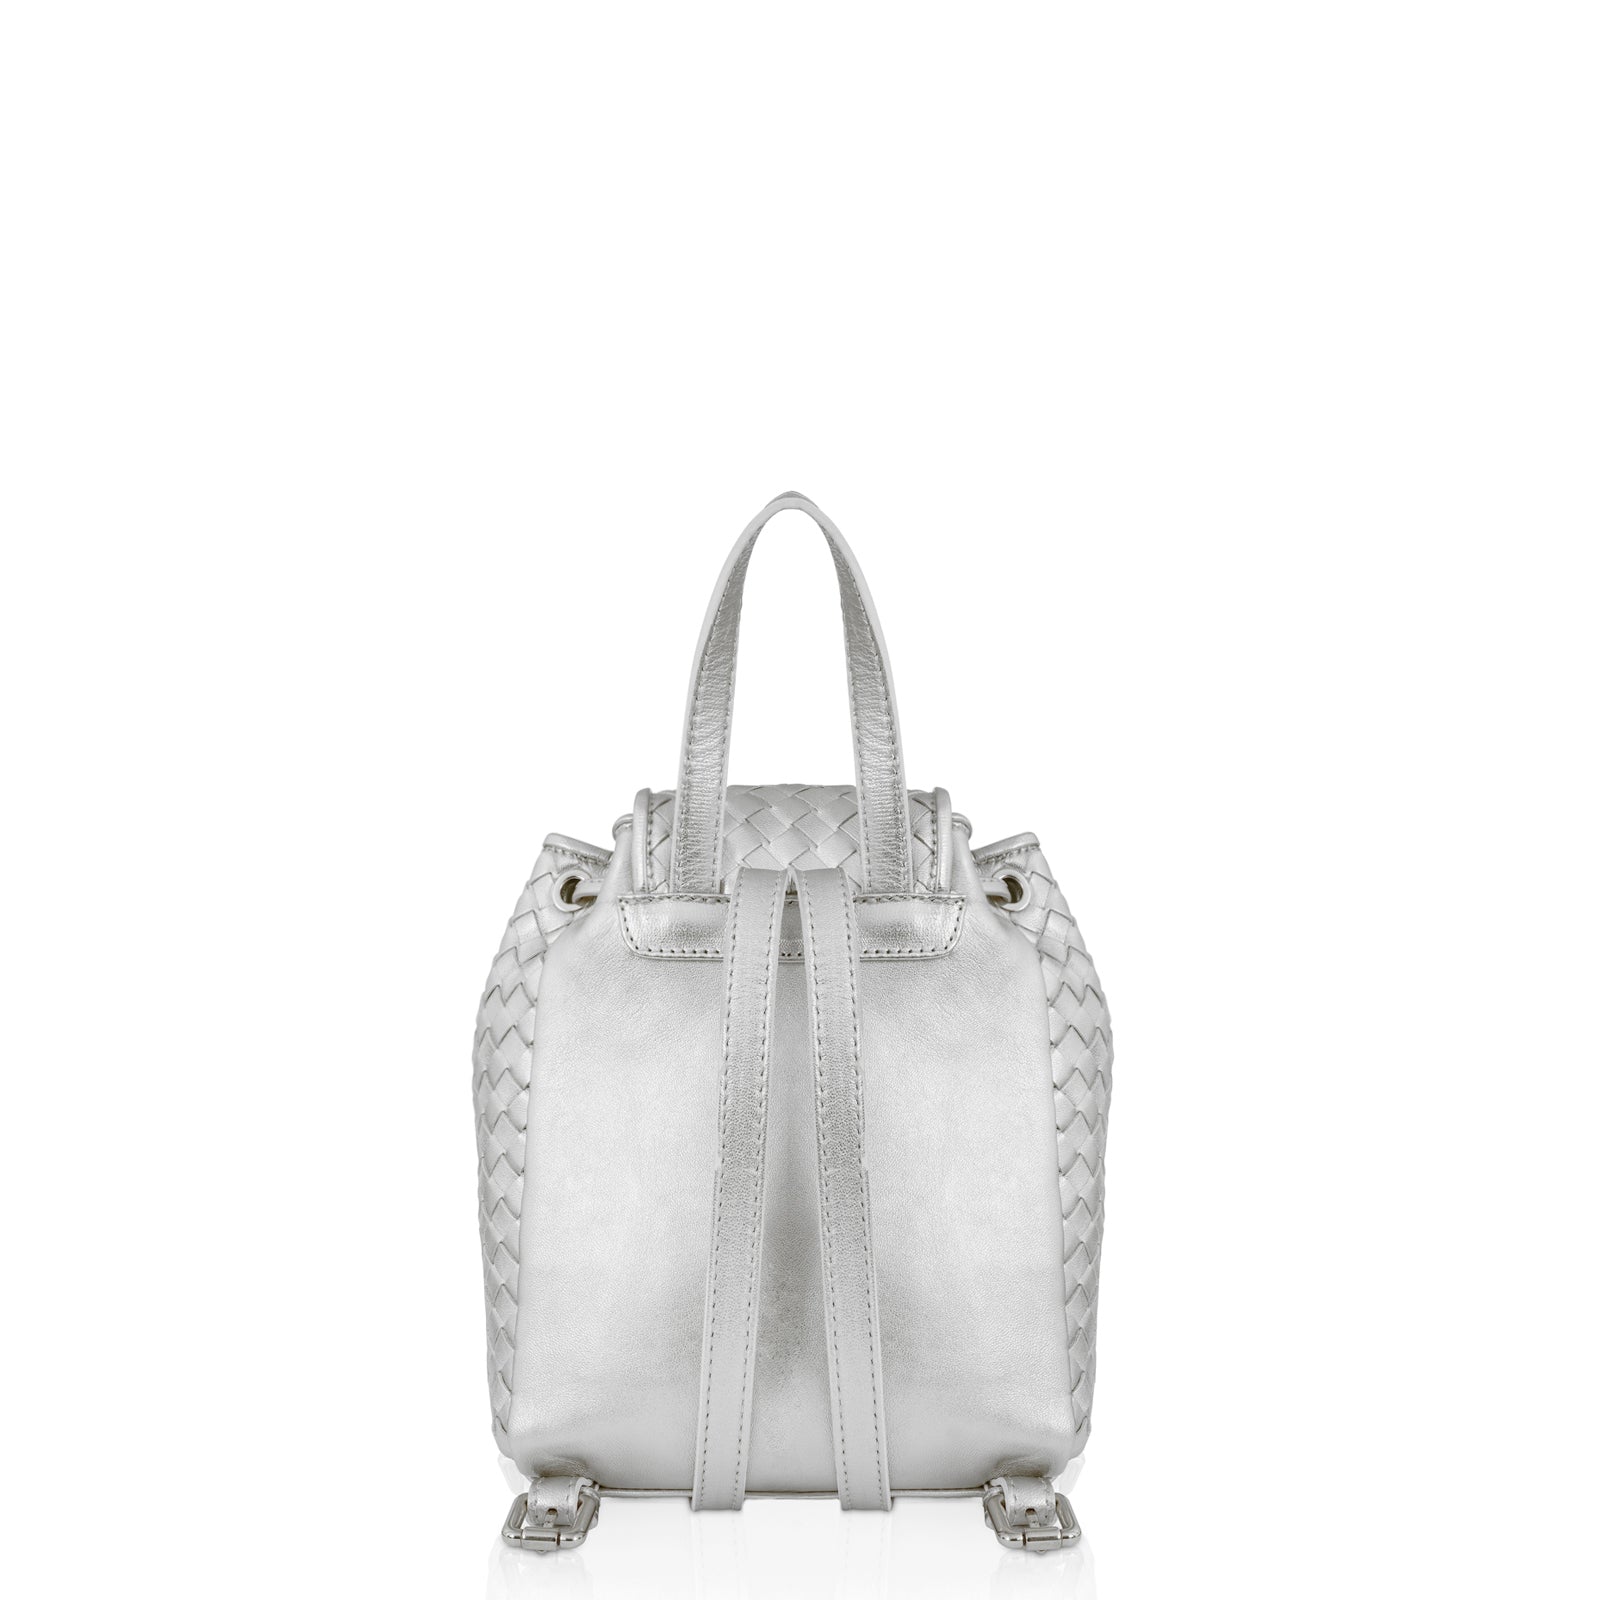 The Mini Haley Woven Backpack – MILANER